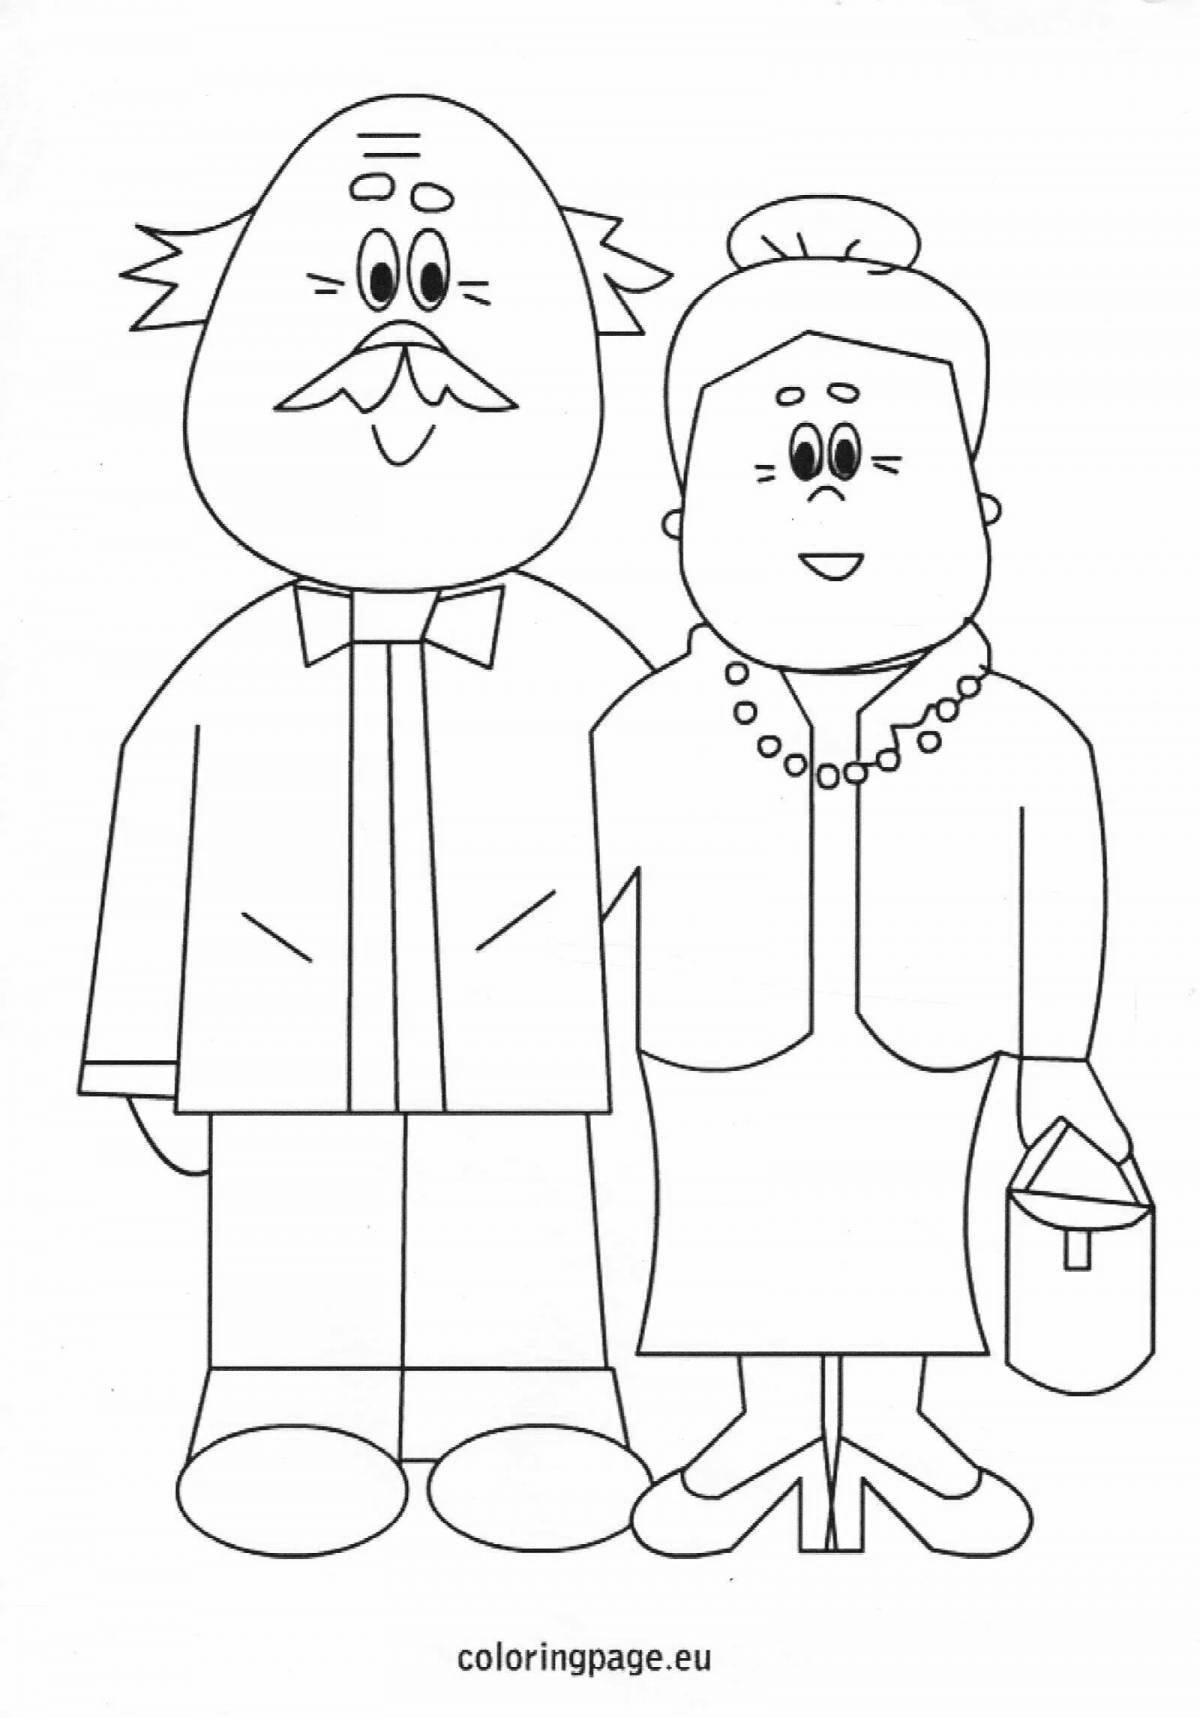 Fun coloring pages of grandparents for kids